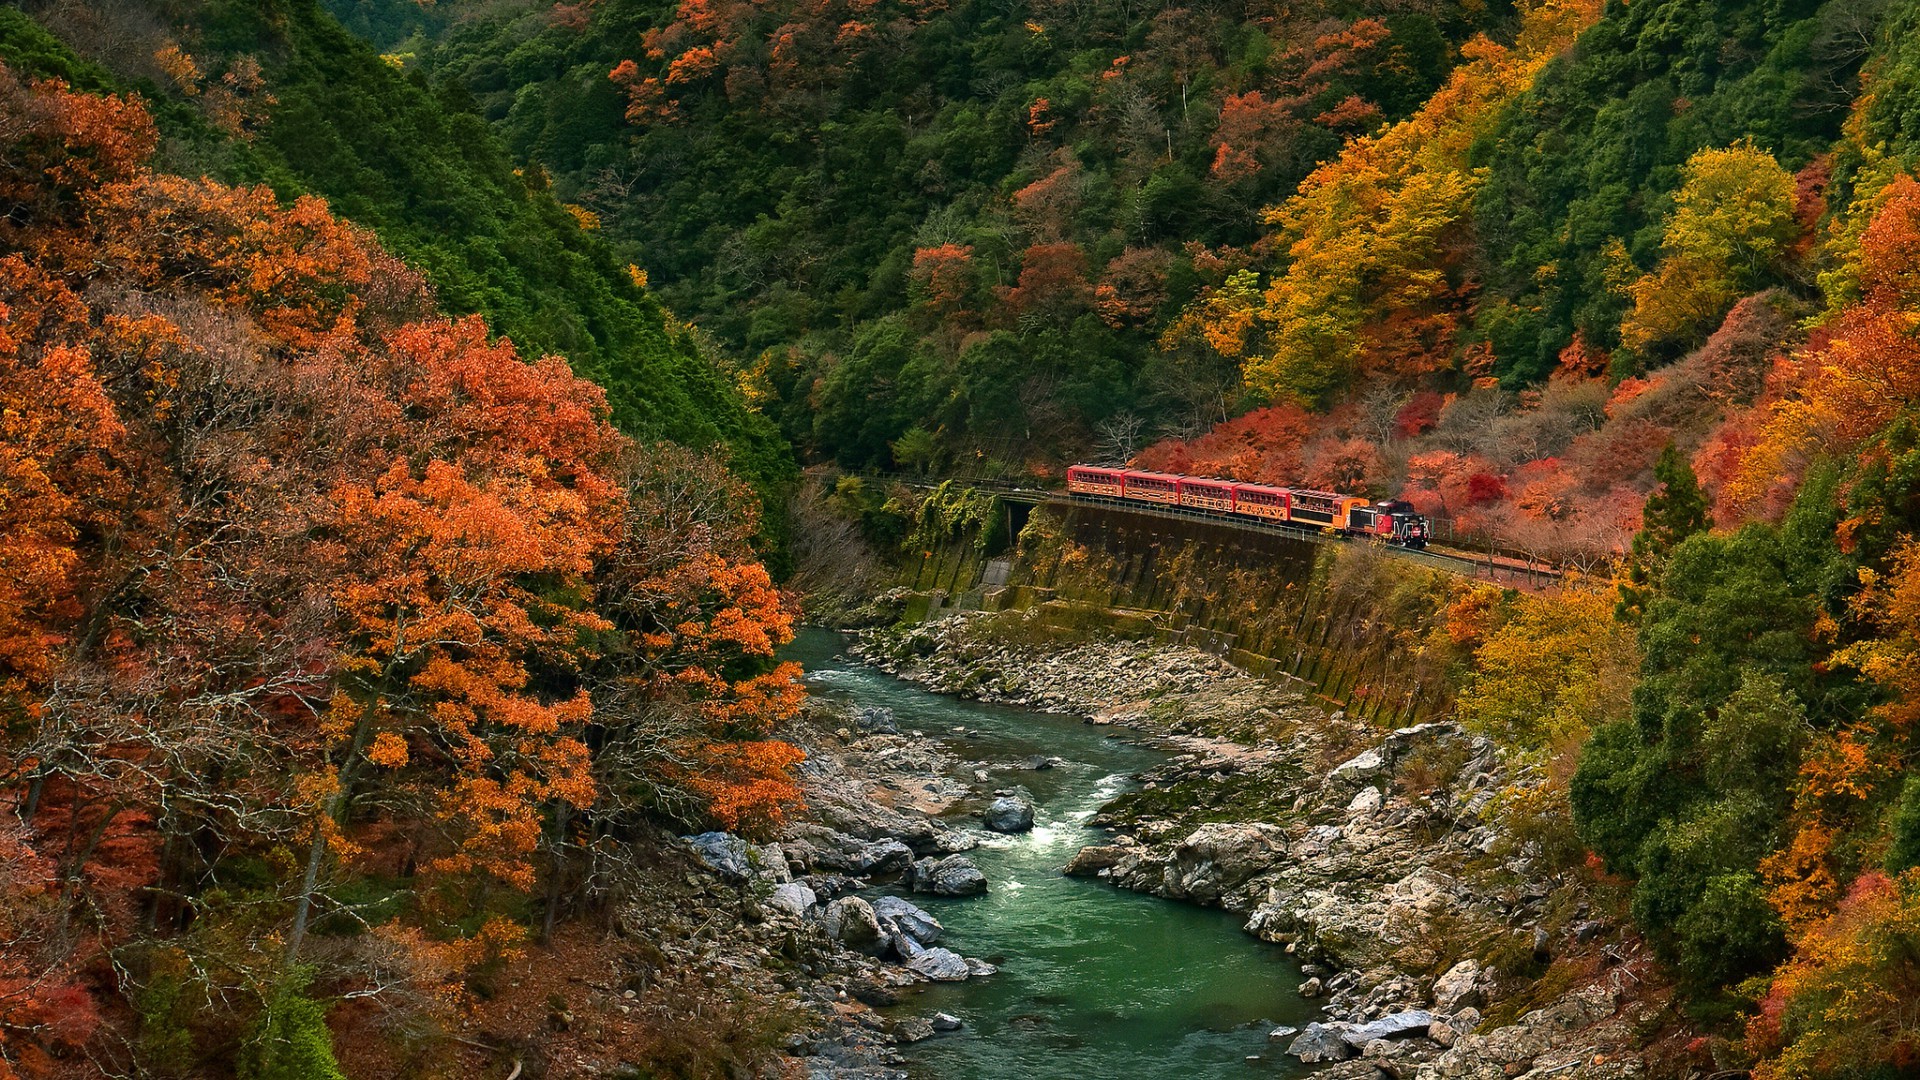 nature, Landscape, Trees, Forest, Branch, Leaves, Colorful, Fall, Rock, Stones, River, Stream, Water, Train, Railway, Bridge Wallpaper